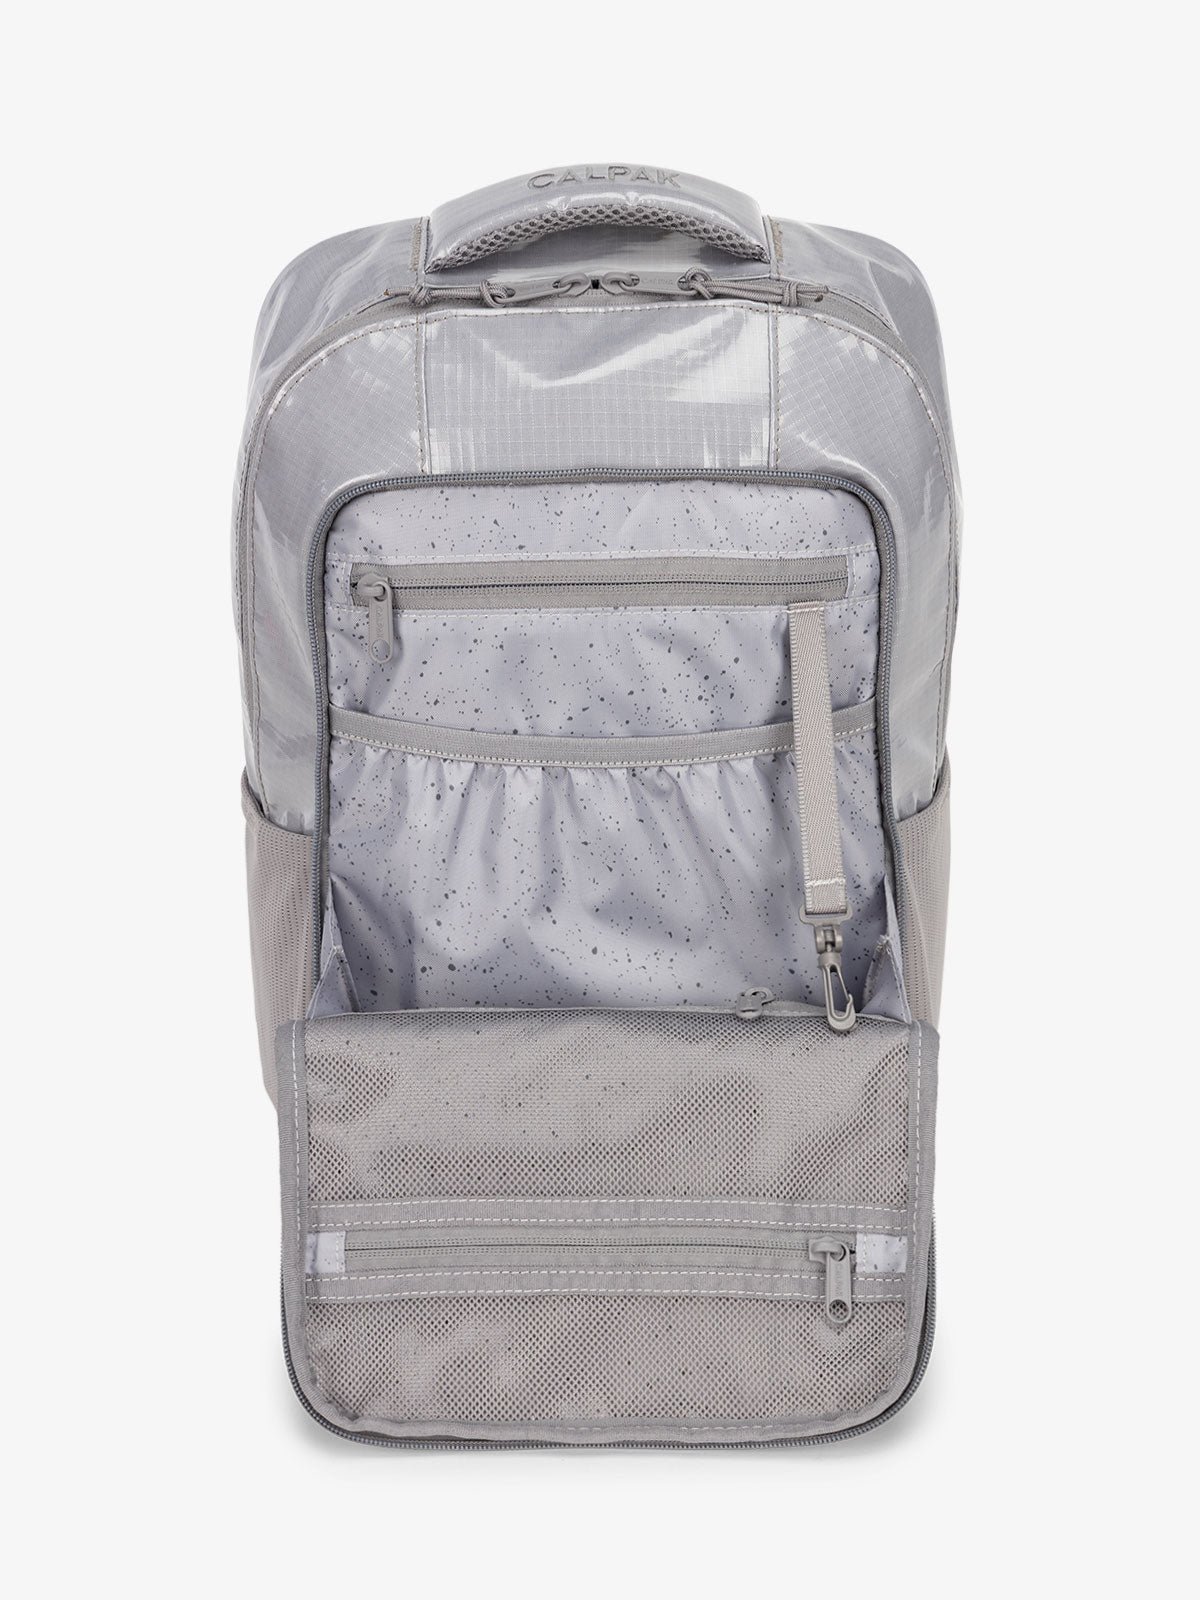 Front organizational panel of CALPAK Terra Hydration Backpack in gray